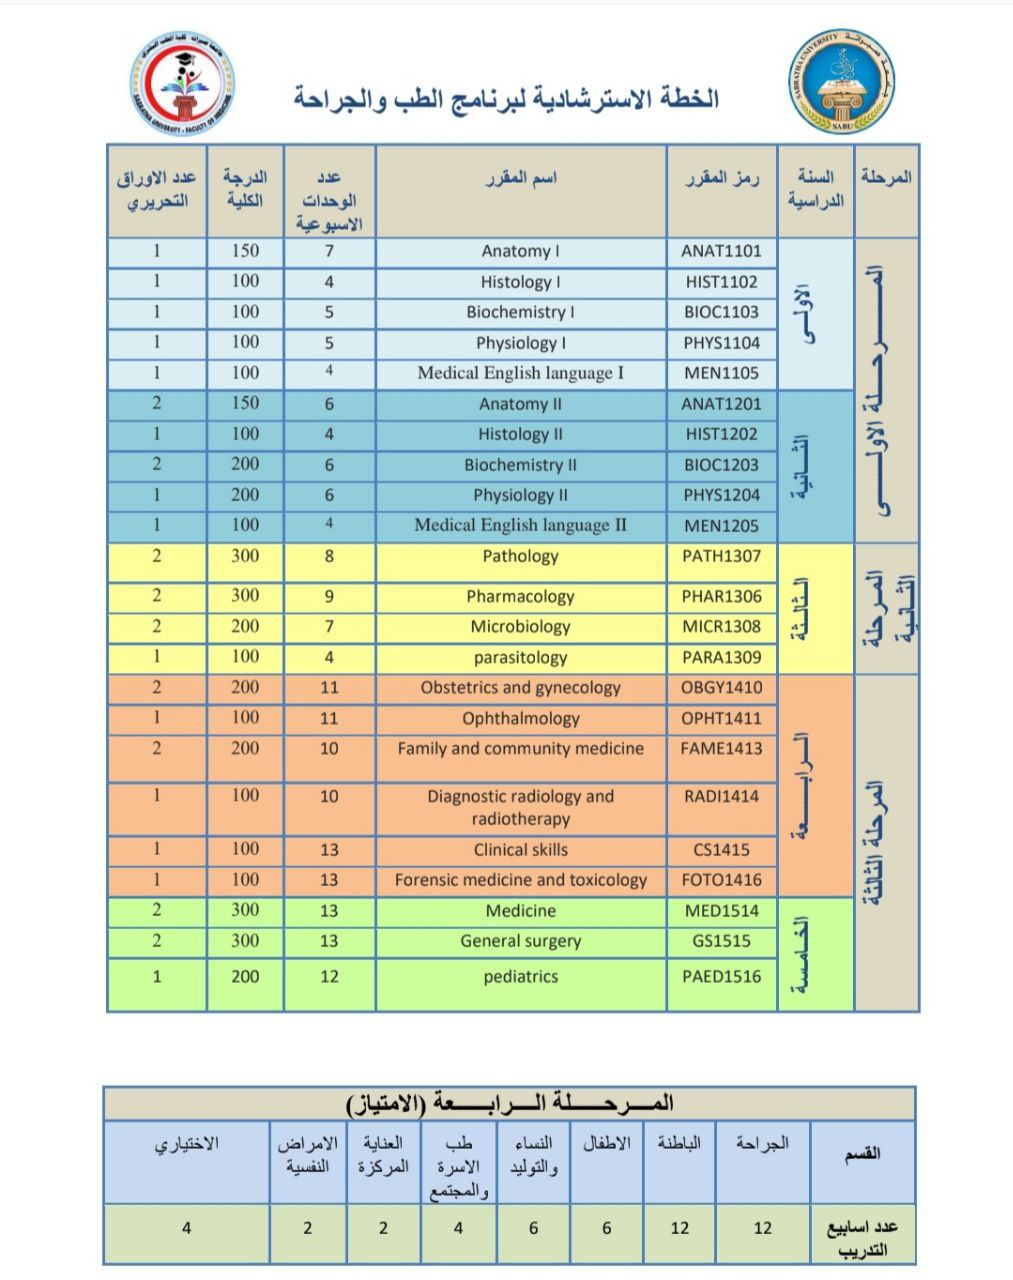 Guidance plan for the medicine and surgery program